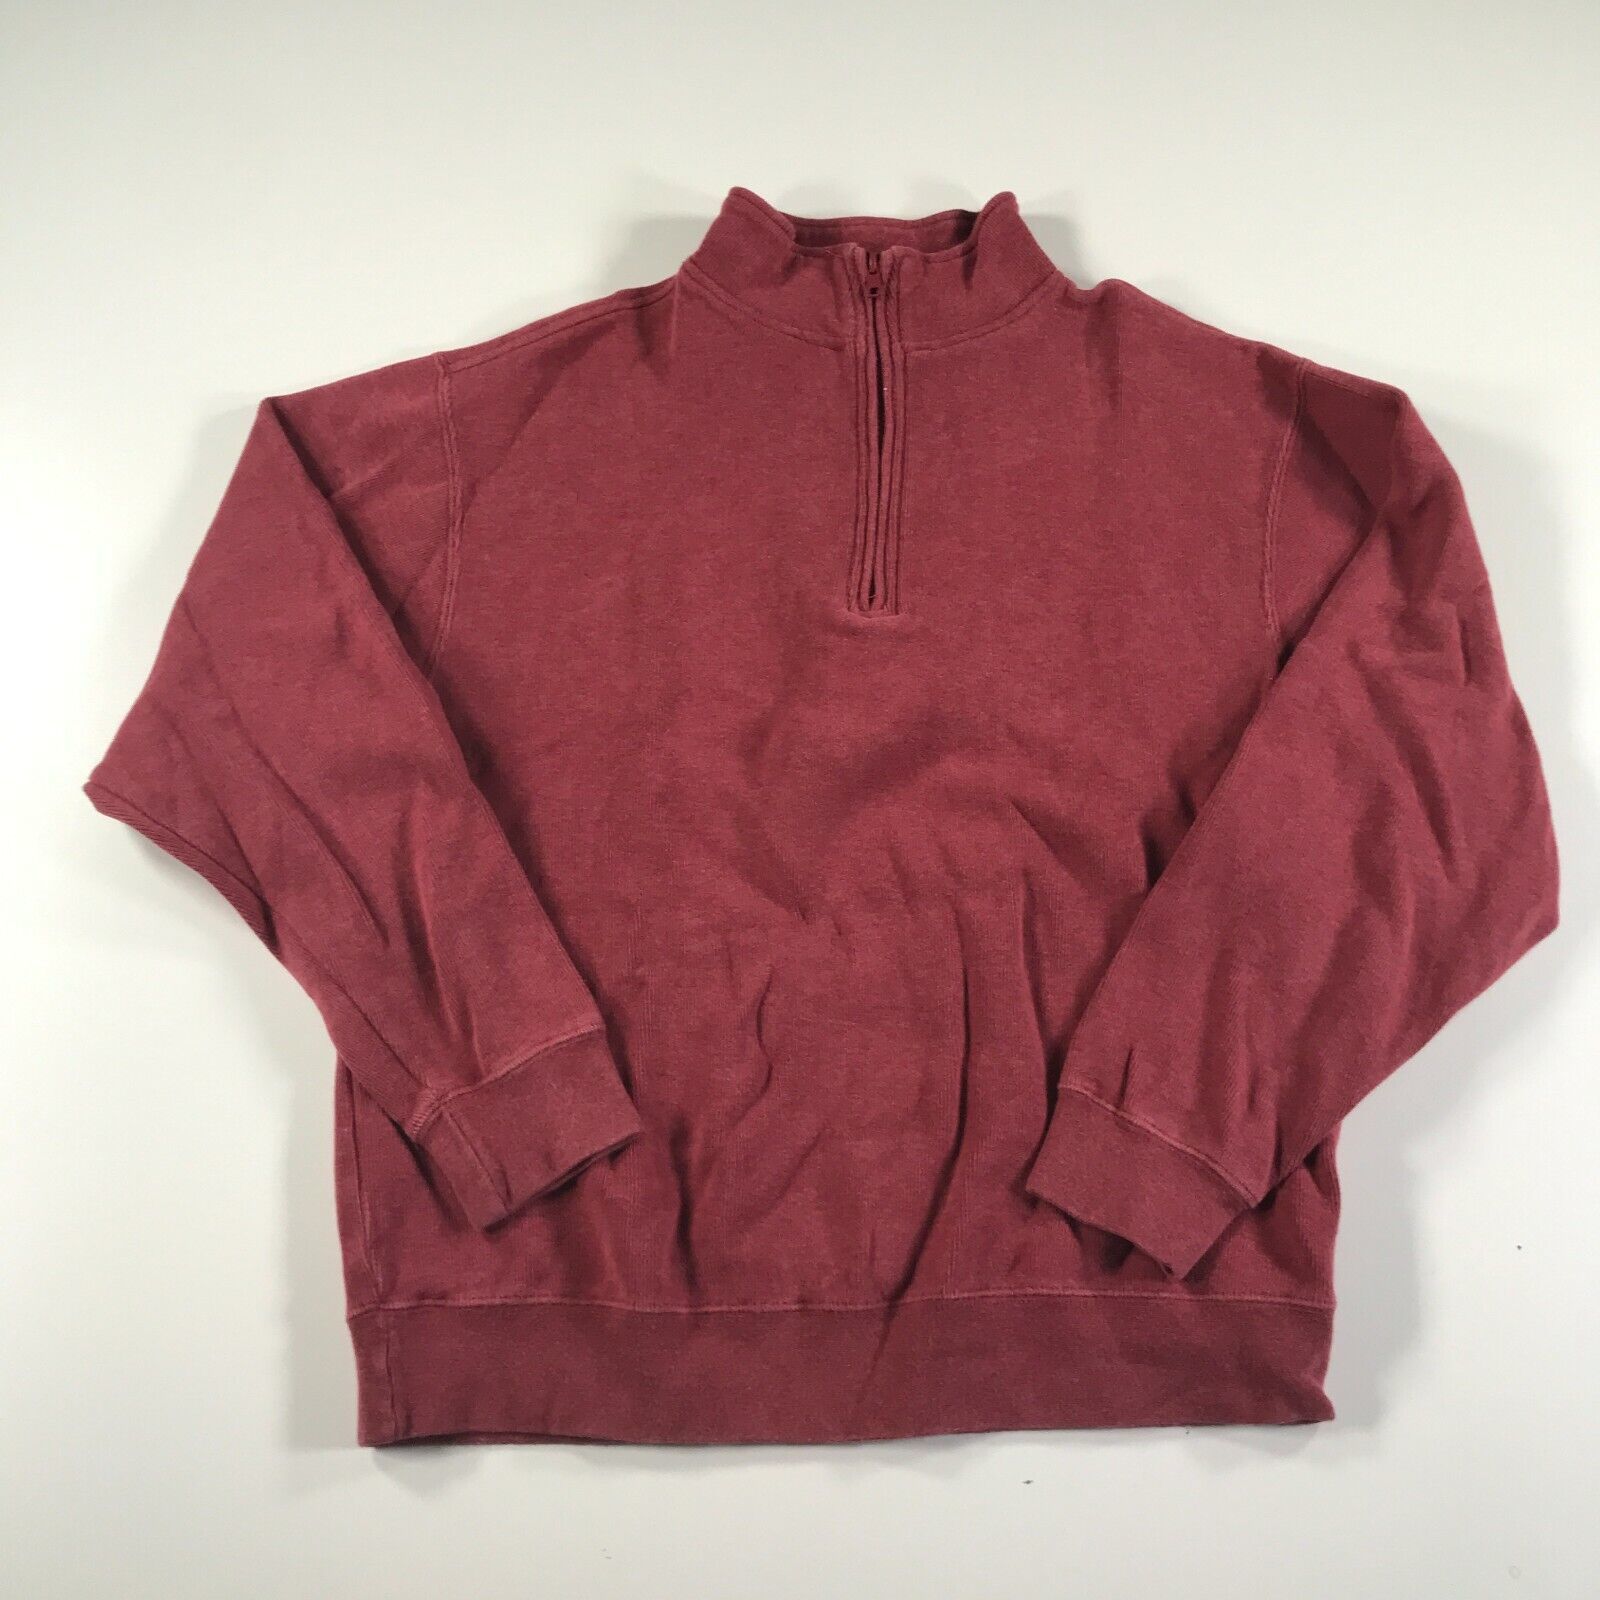 Primary image for Orvis Sweater Mens Medium Red Quarter Zip Long Sleeve Thick Cotton